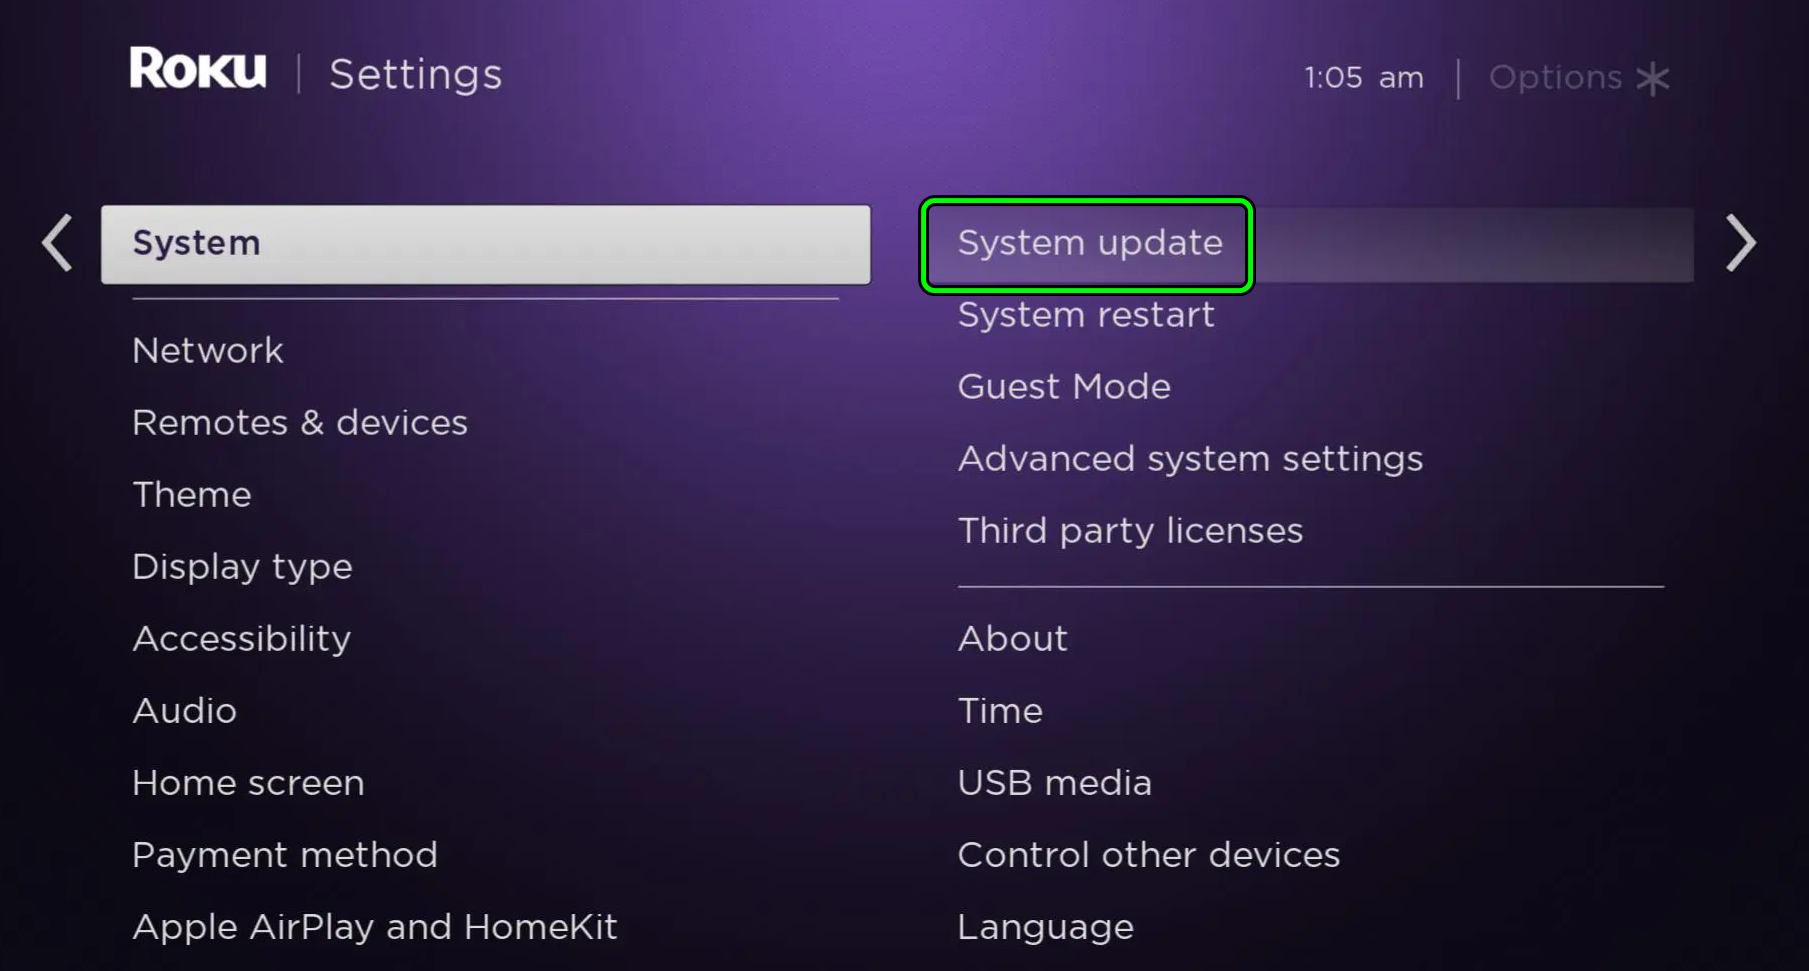 Open System Update in the Roku Device Settings